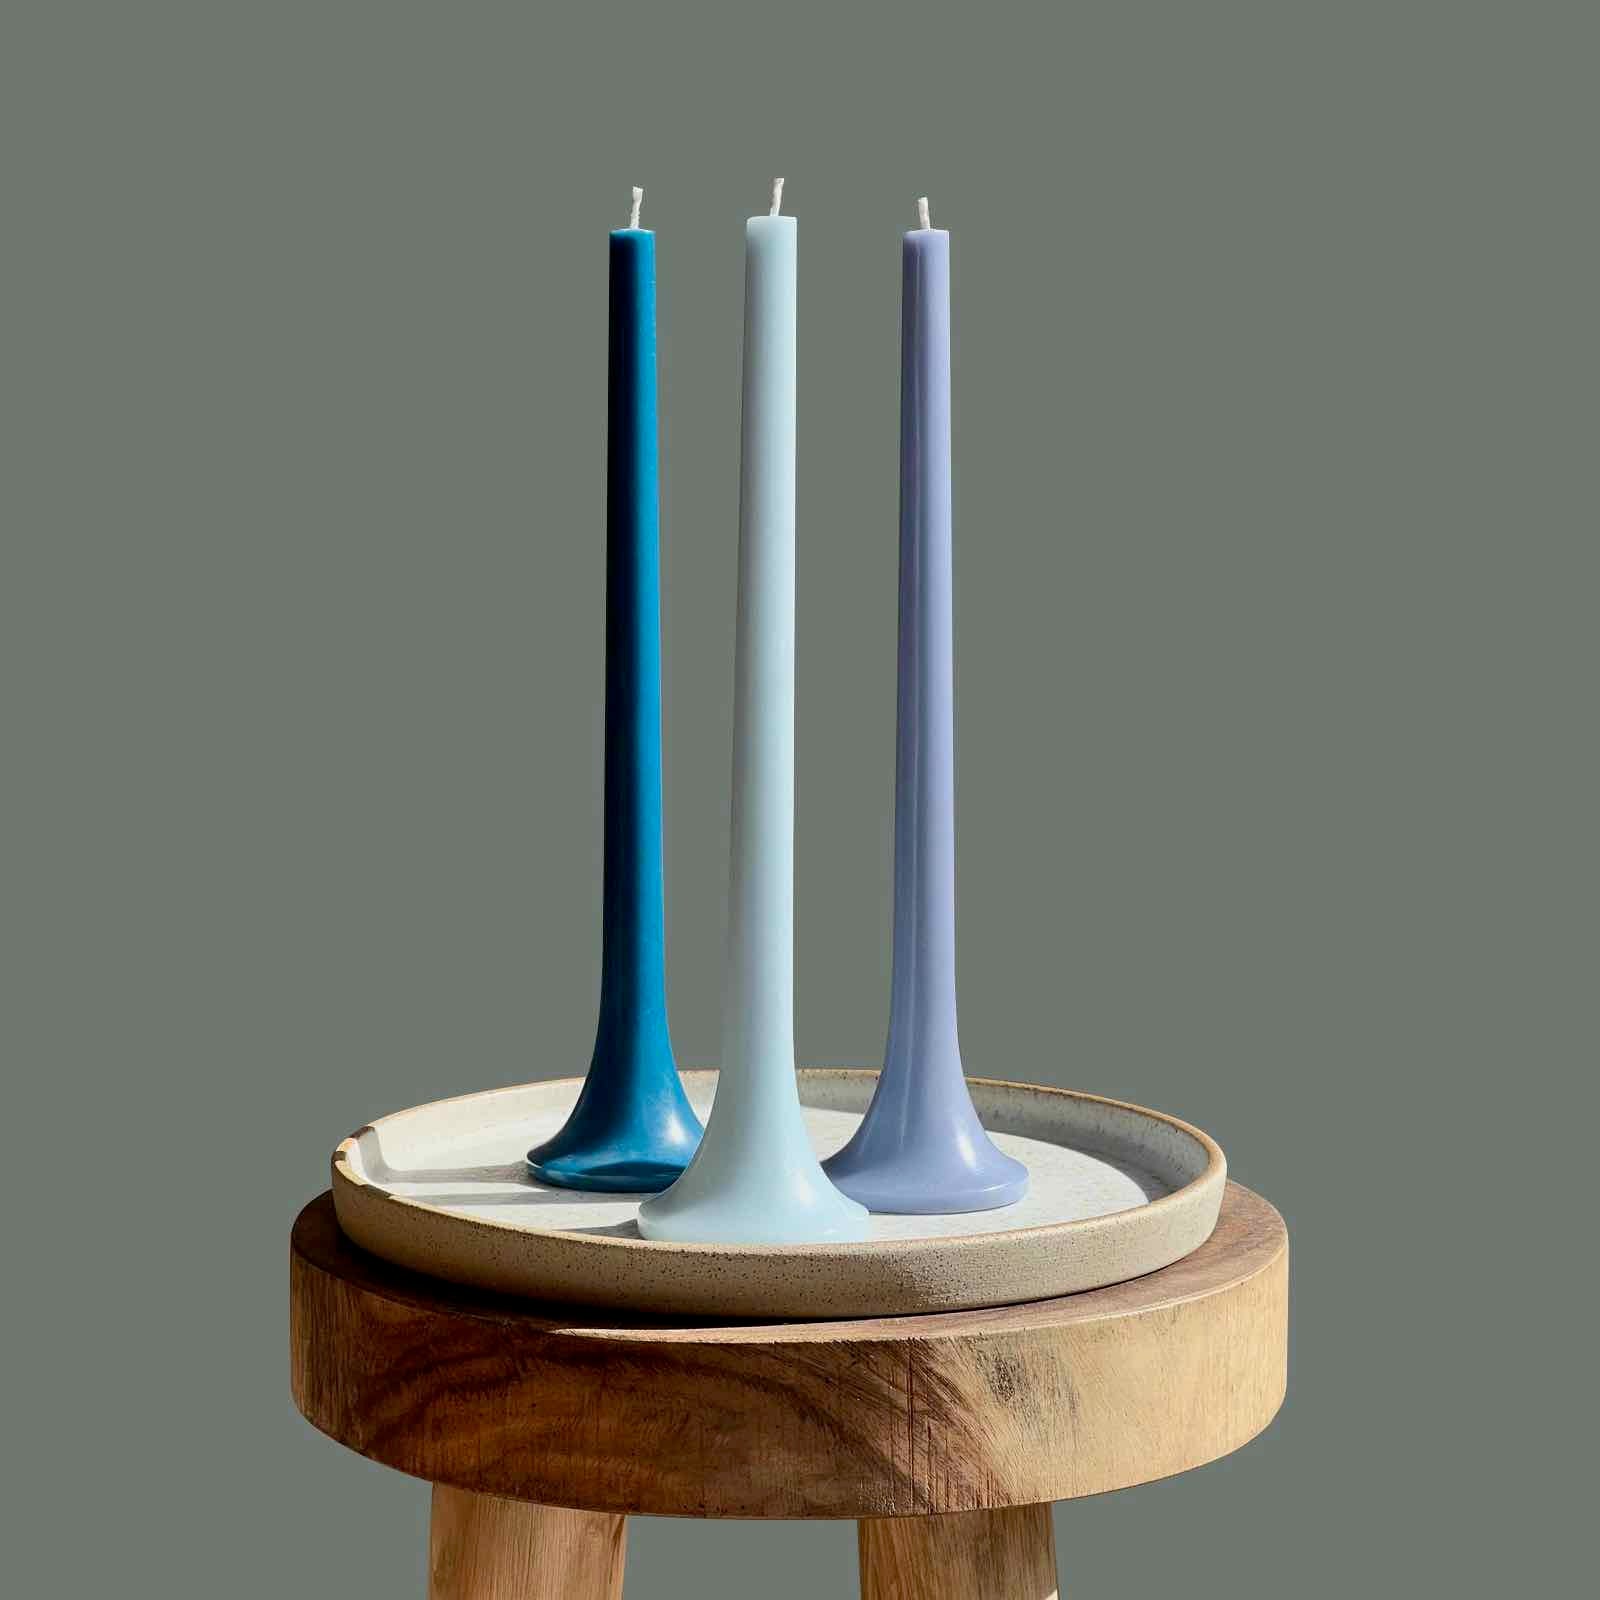 Blue taper candles